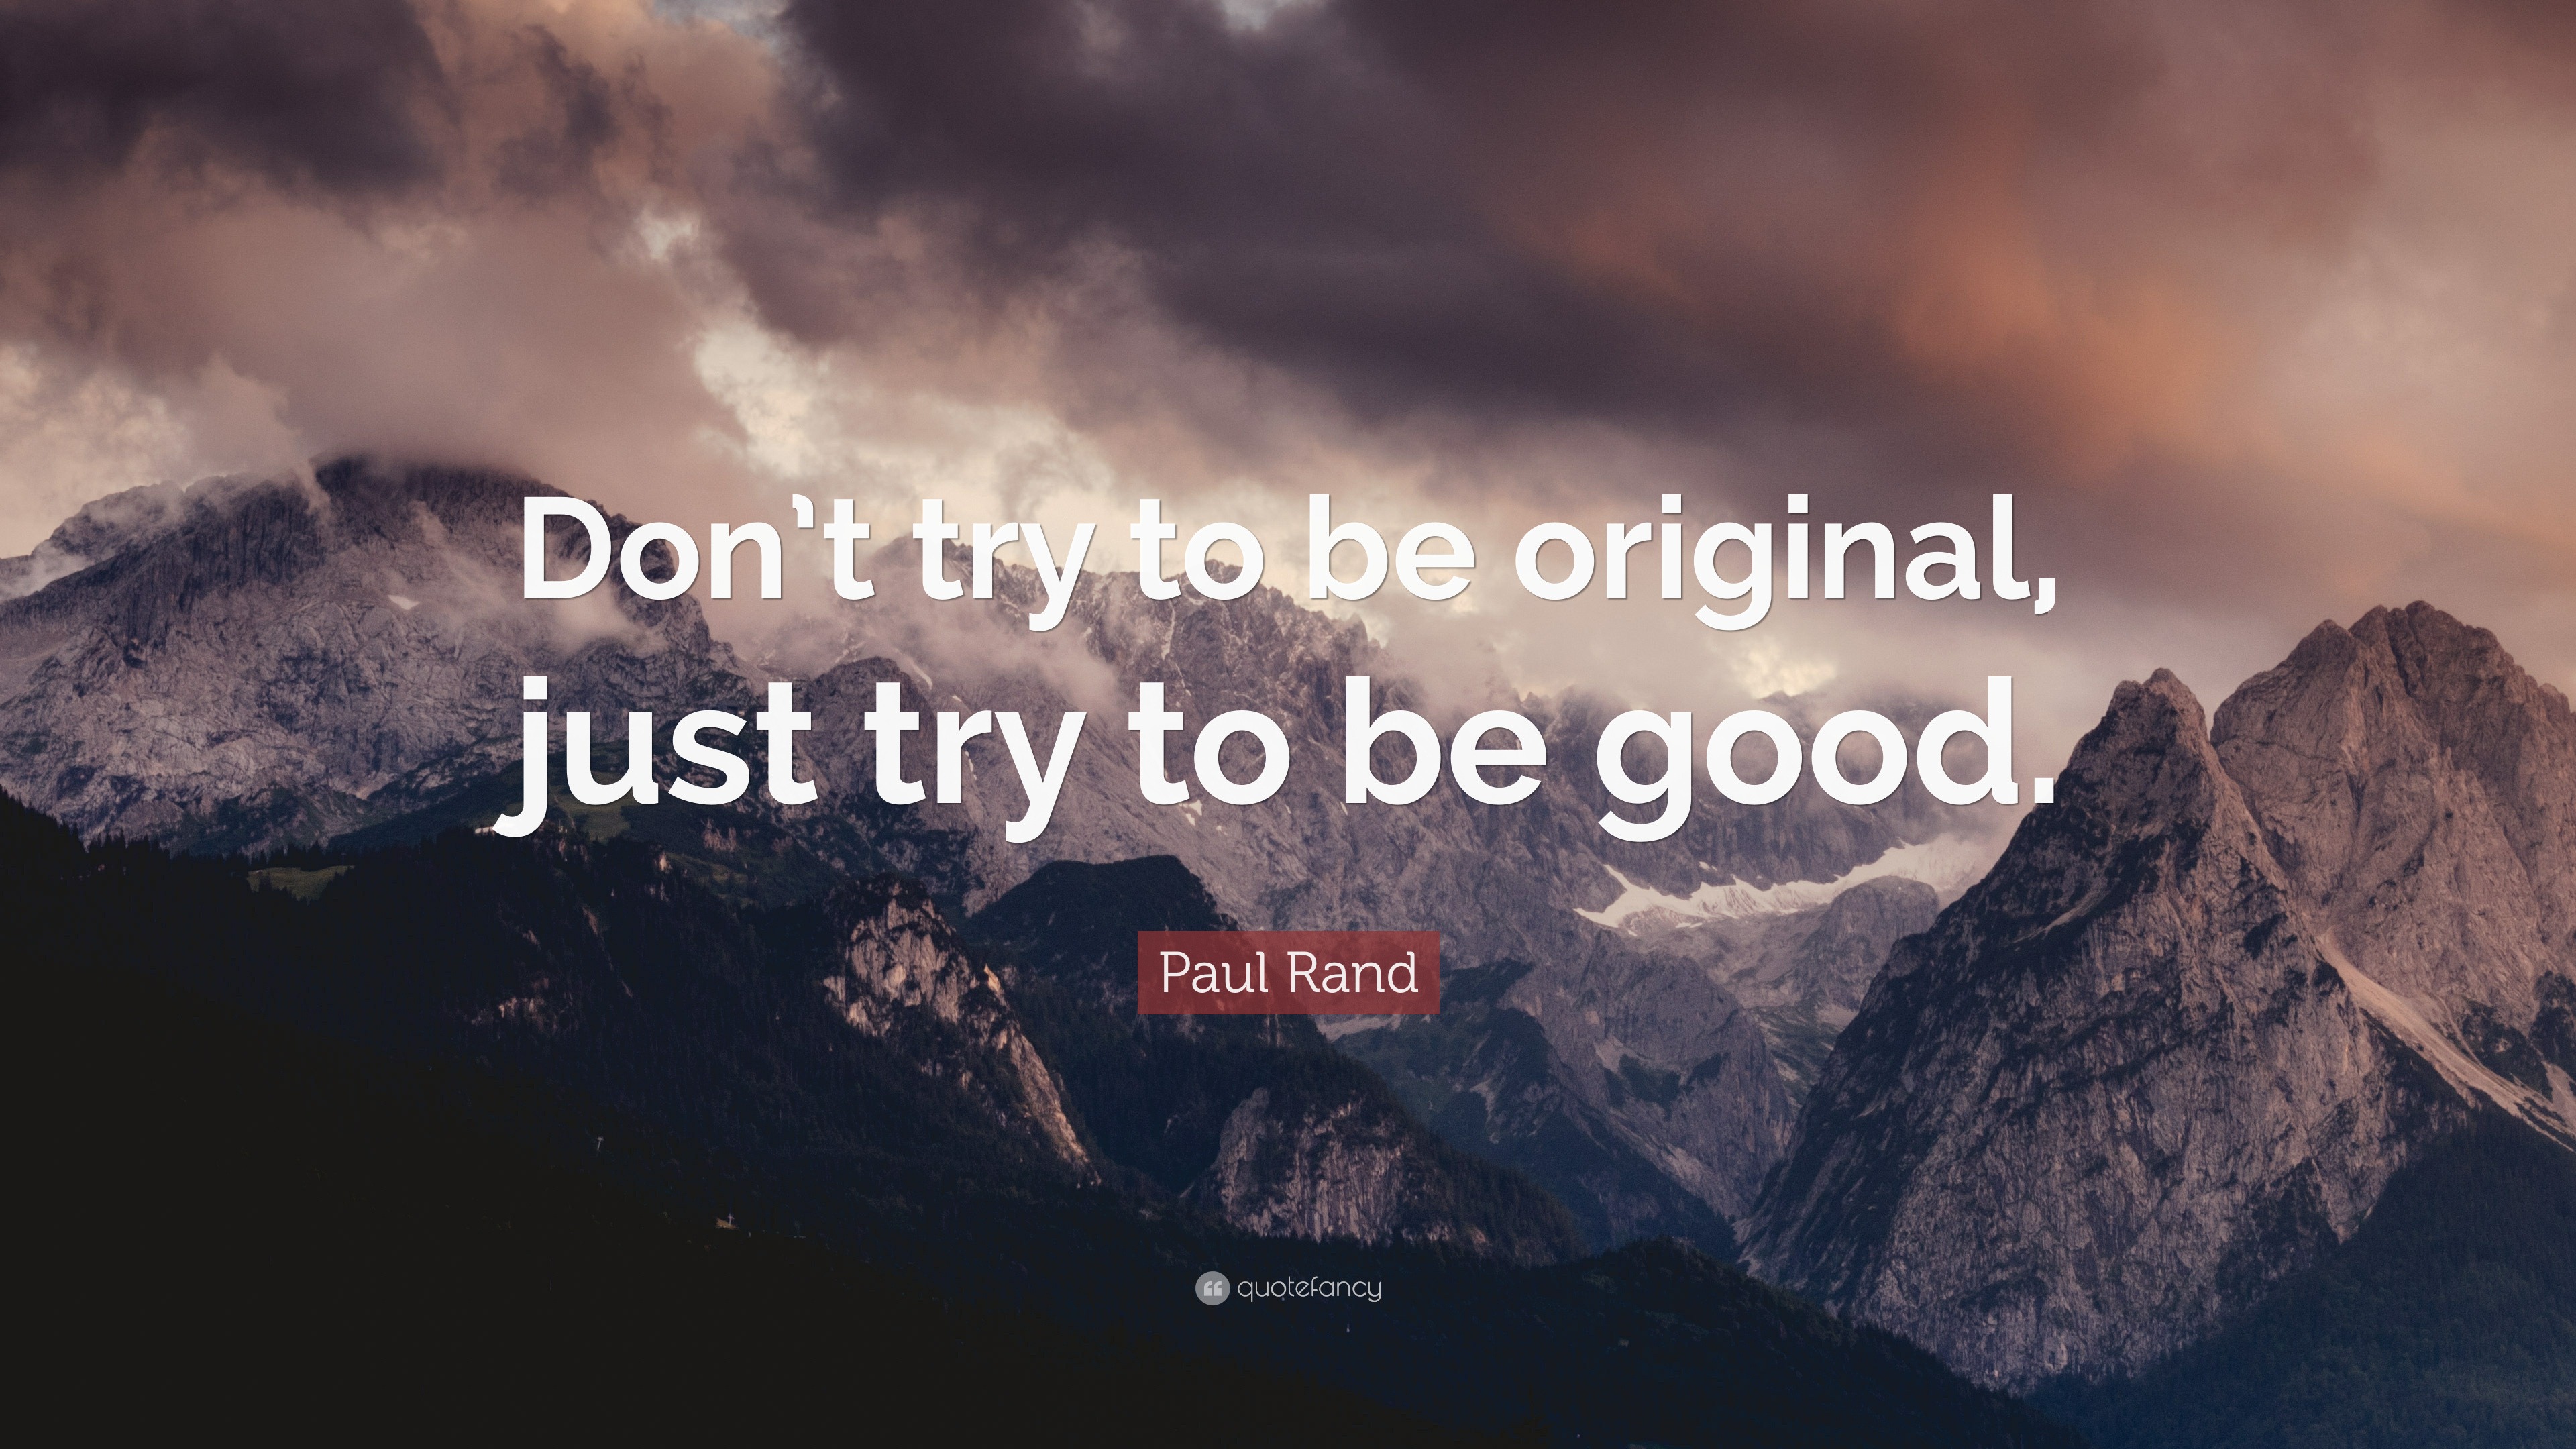 Paul Rand Quote: “Don’t try to be original, just try to be good.” (19